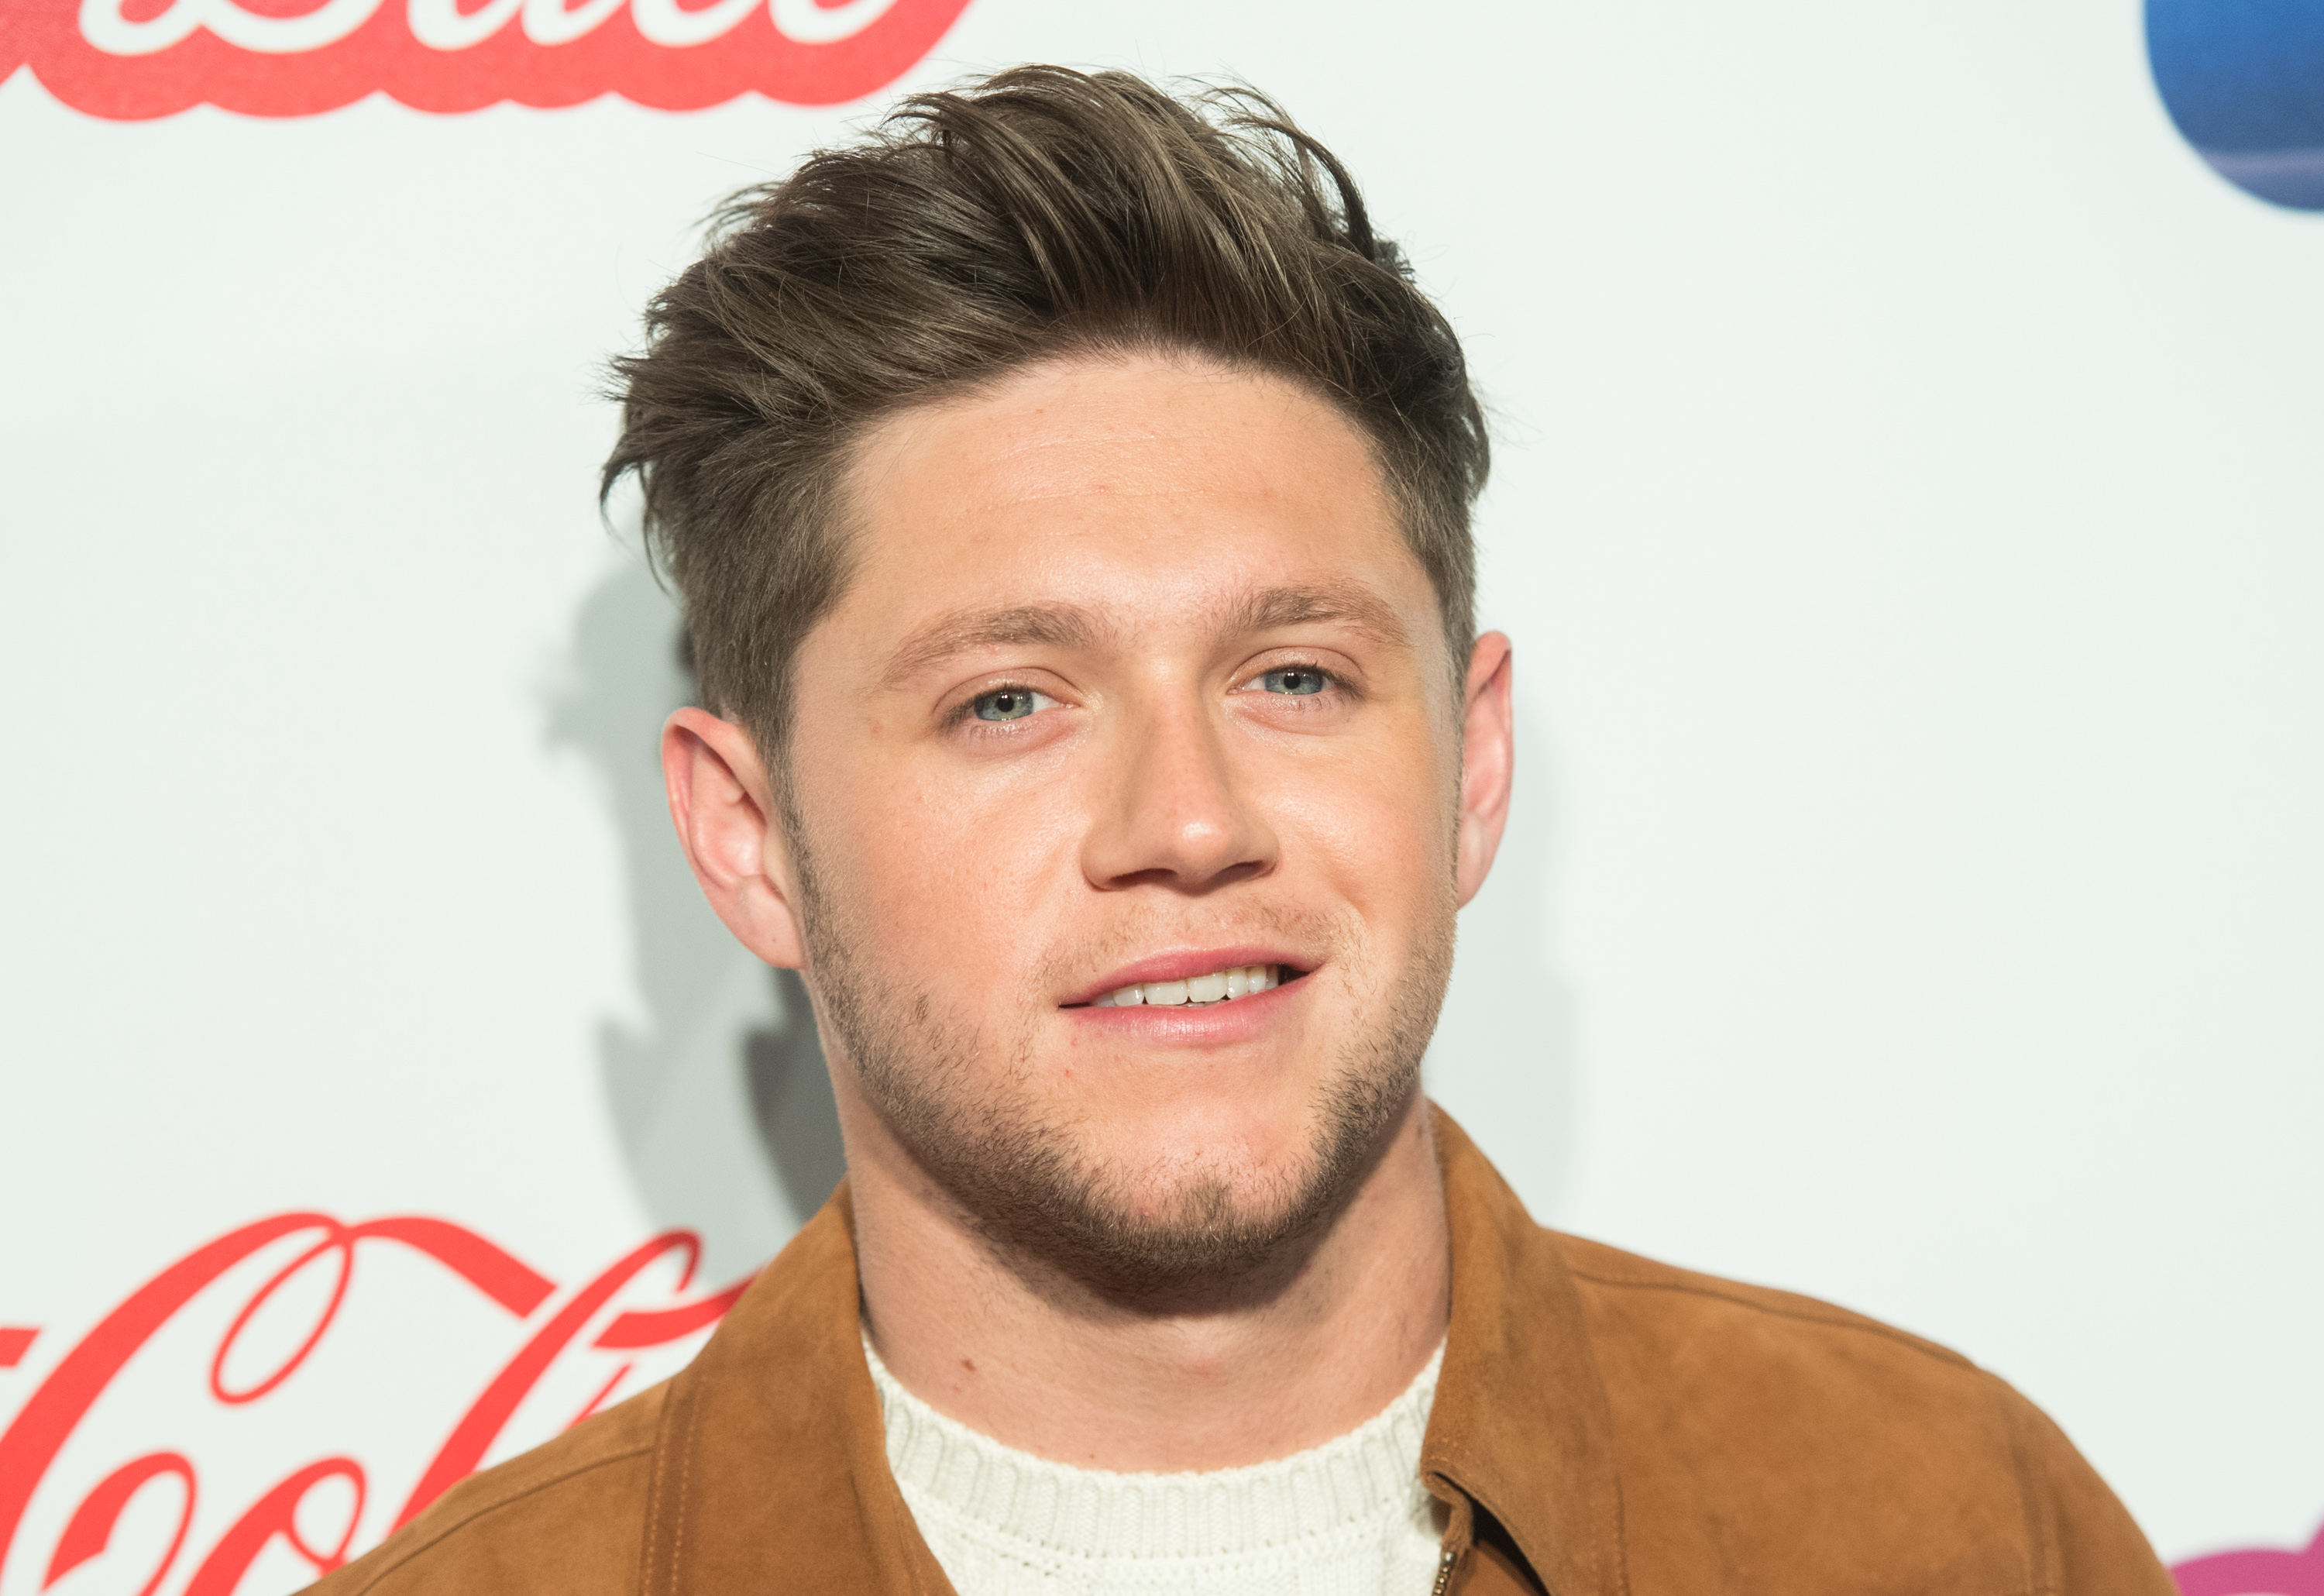 Niall Horan attends the Capital FM Jingle Bell Ball with Coca-Cola at The O2 Arena on December 9, 2017 in London, England. (Samir Hussein—Samir Hussein/WireImage)